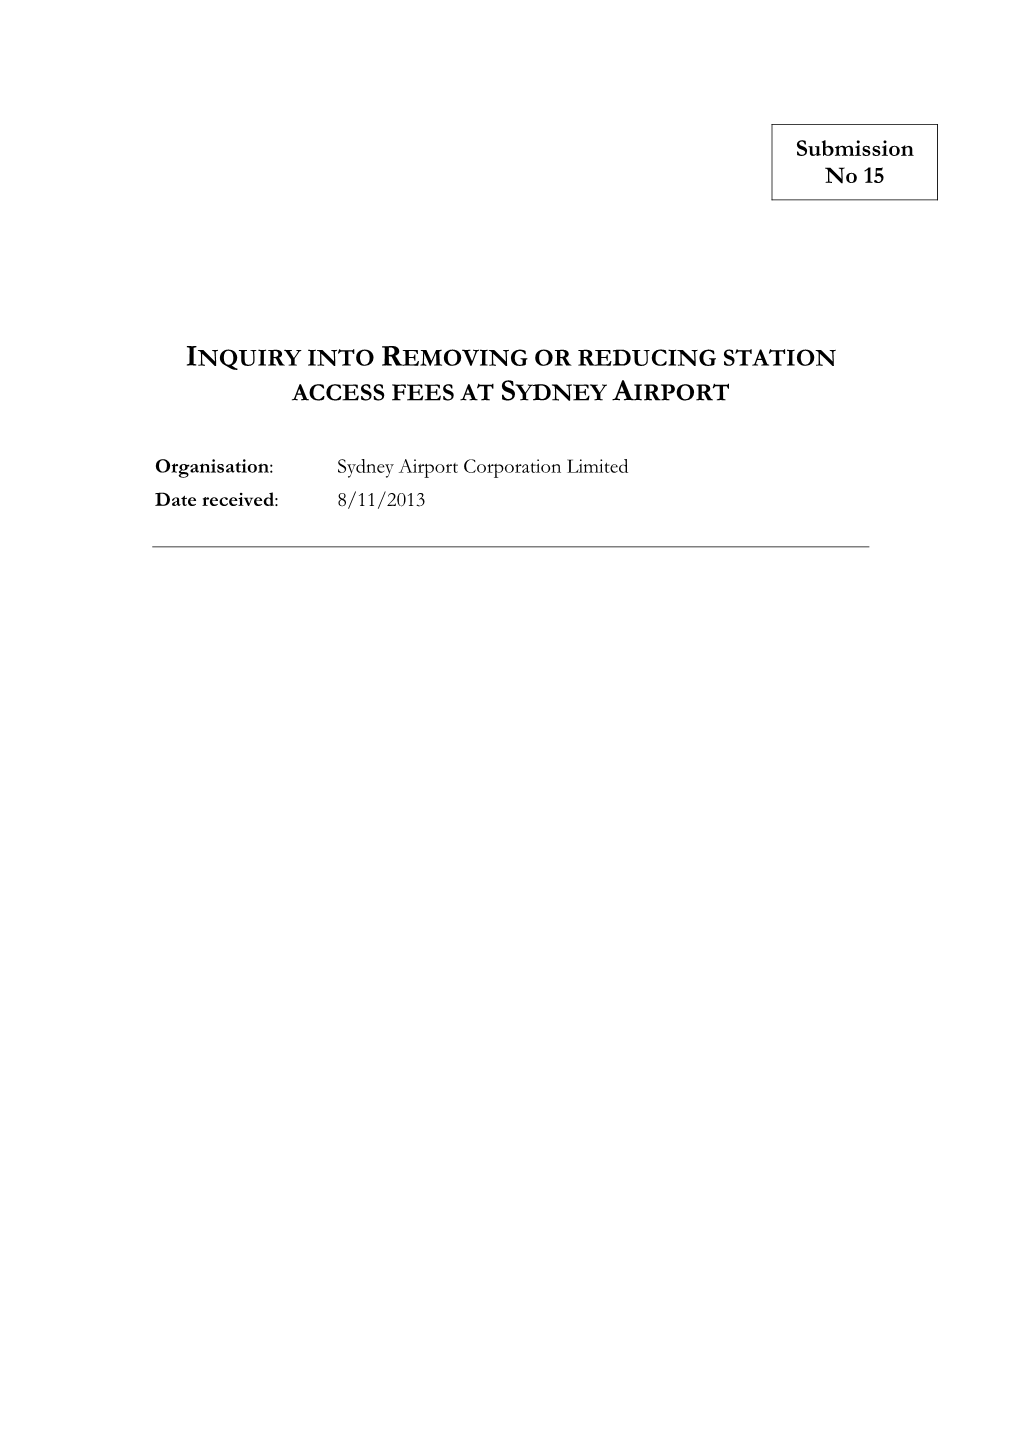 Inquiry Into Removing Or Reducing Station Access Fees at Sydney Airport